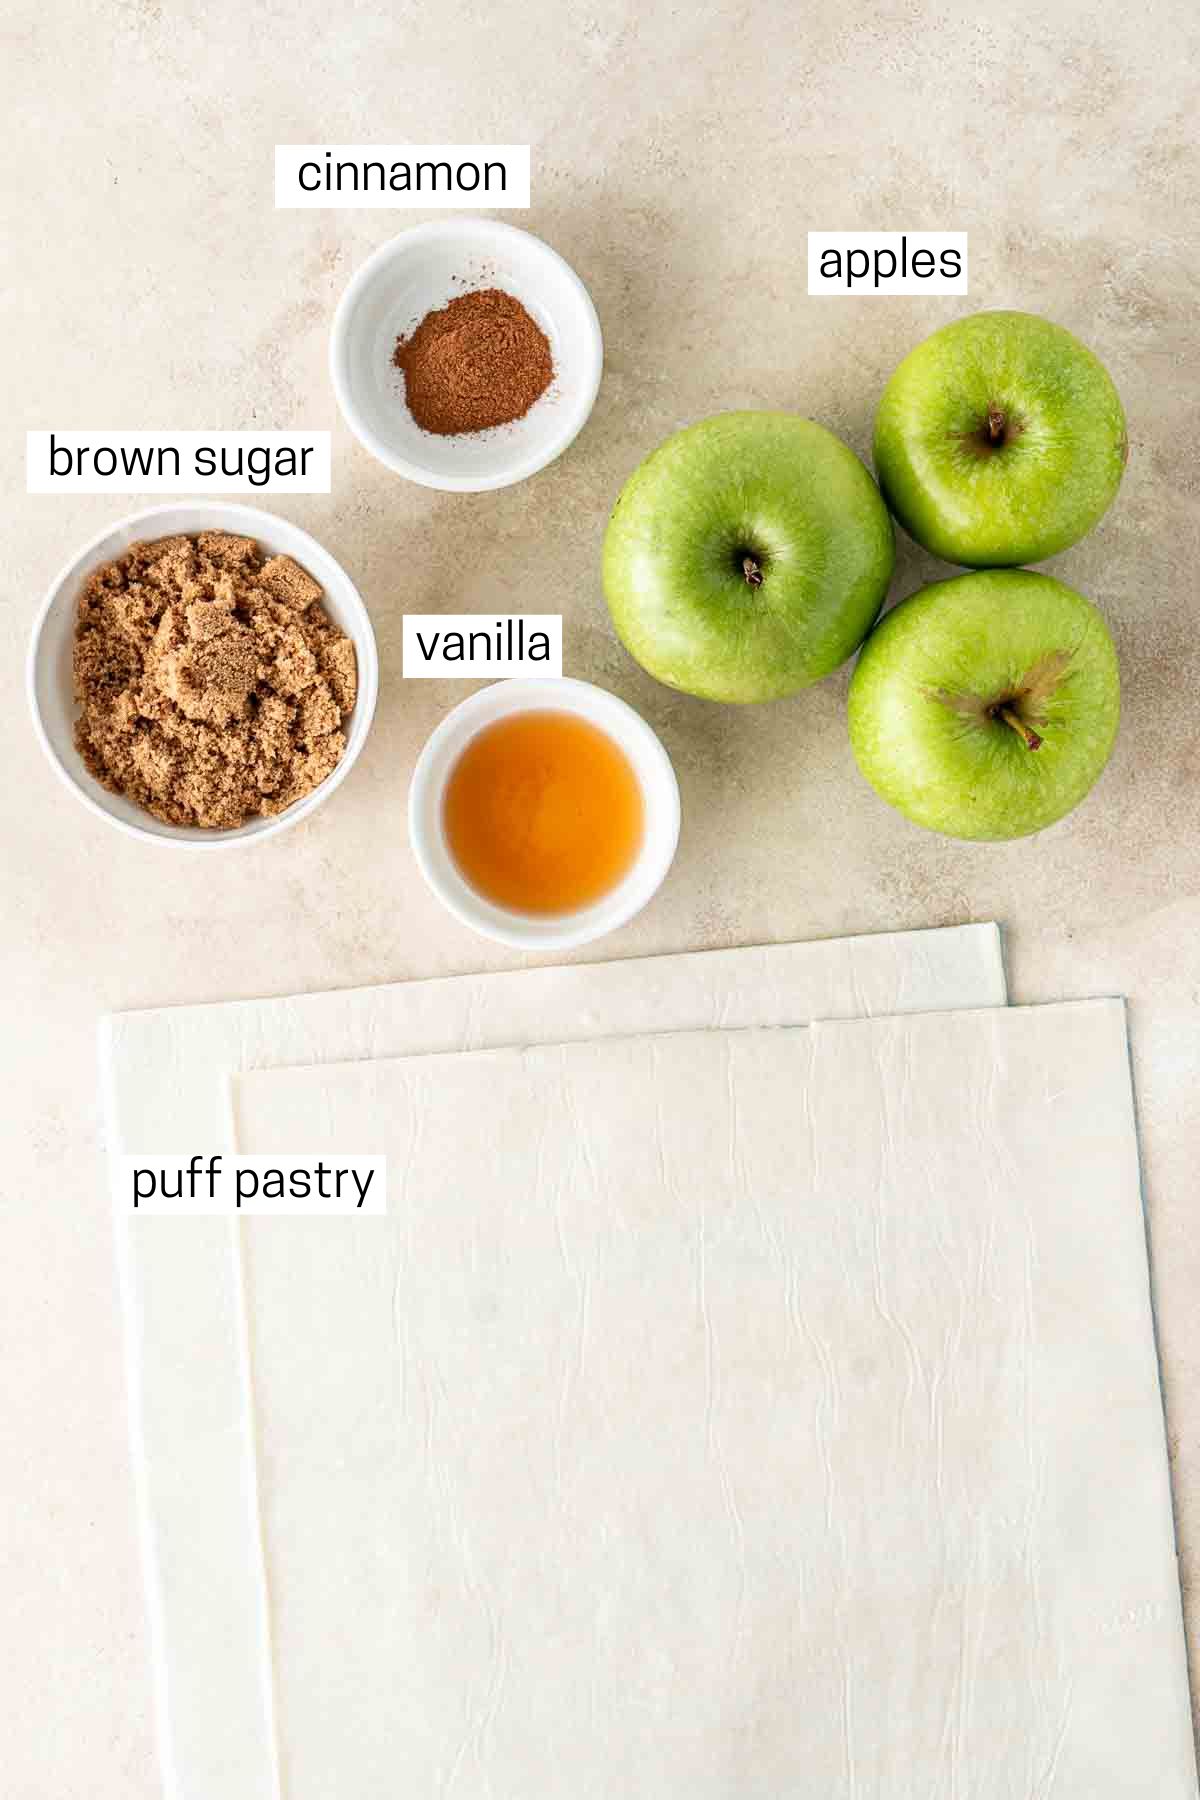 All ingredients needed to make apple turnovers laid out in bowls.